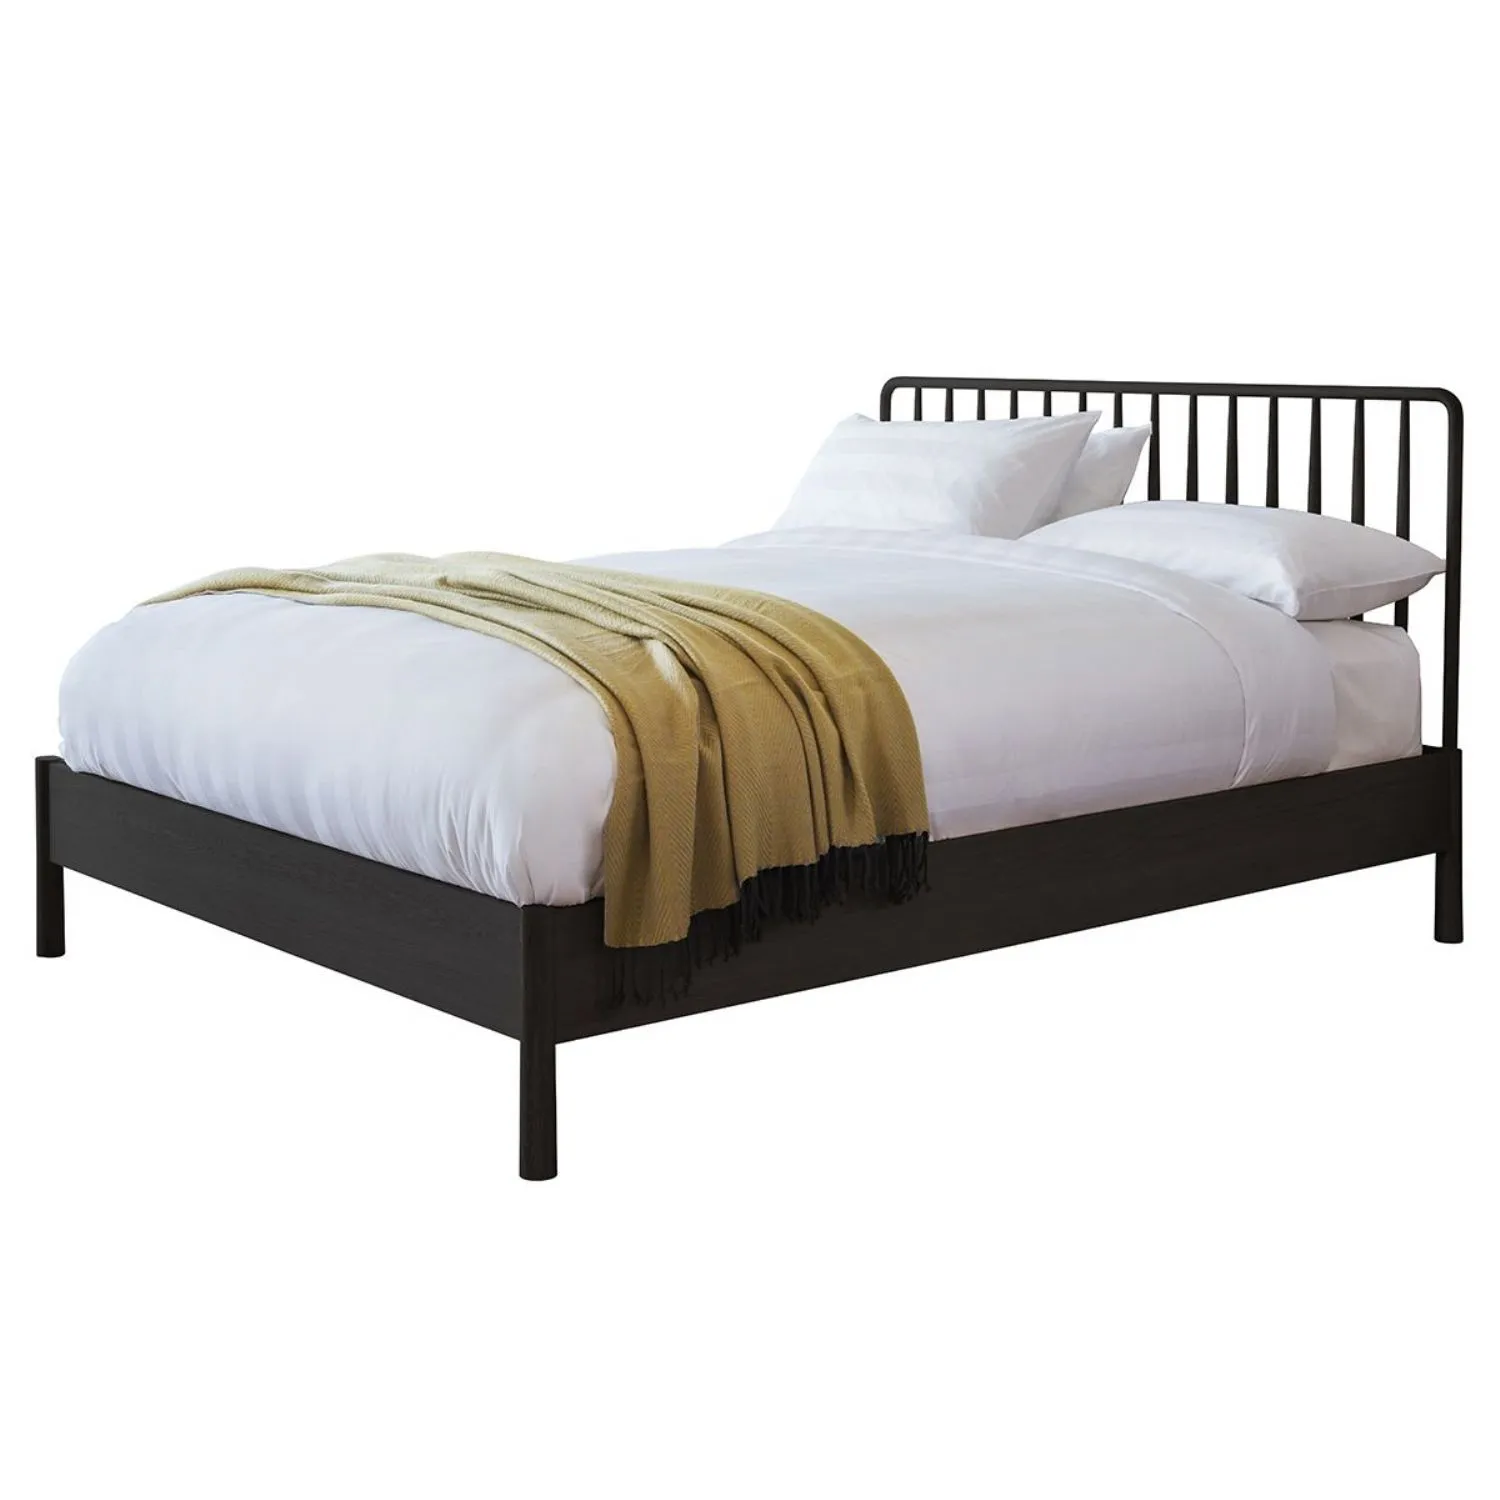 Nordic Black Painted King Size Spindle Bed Solid Oak Wood